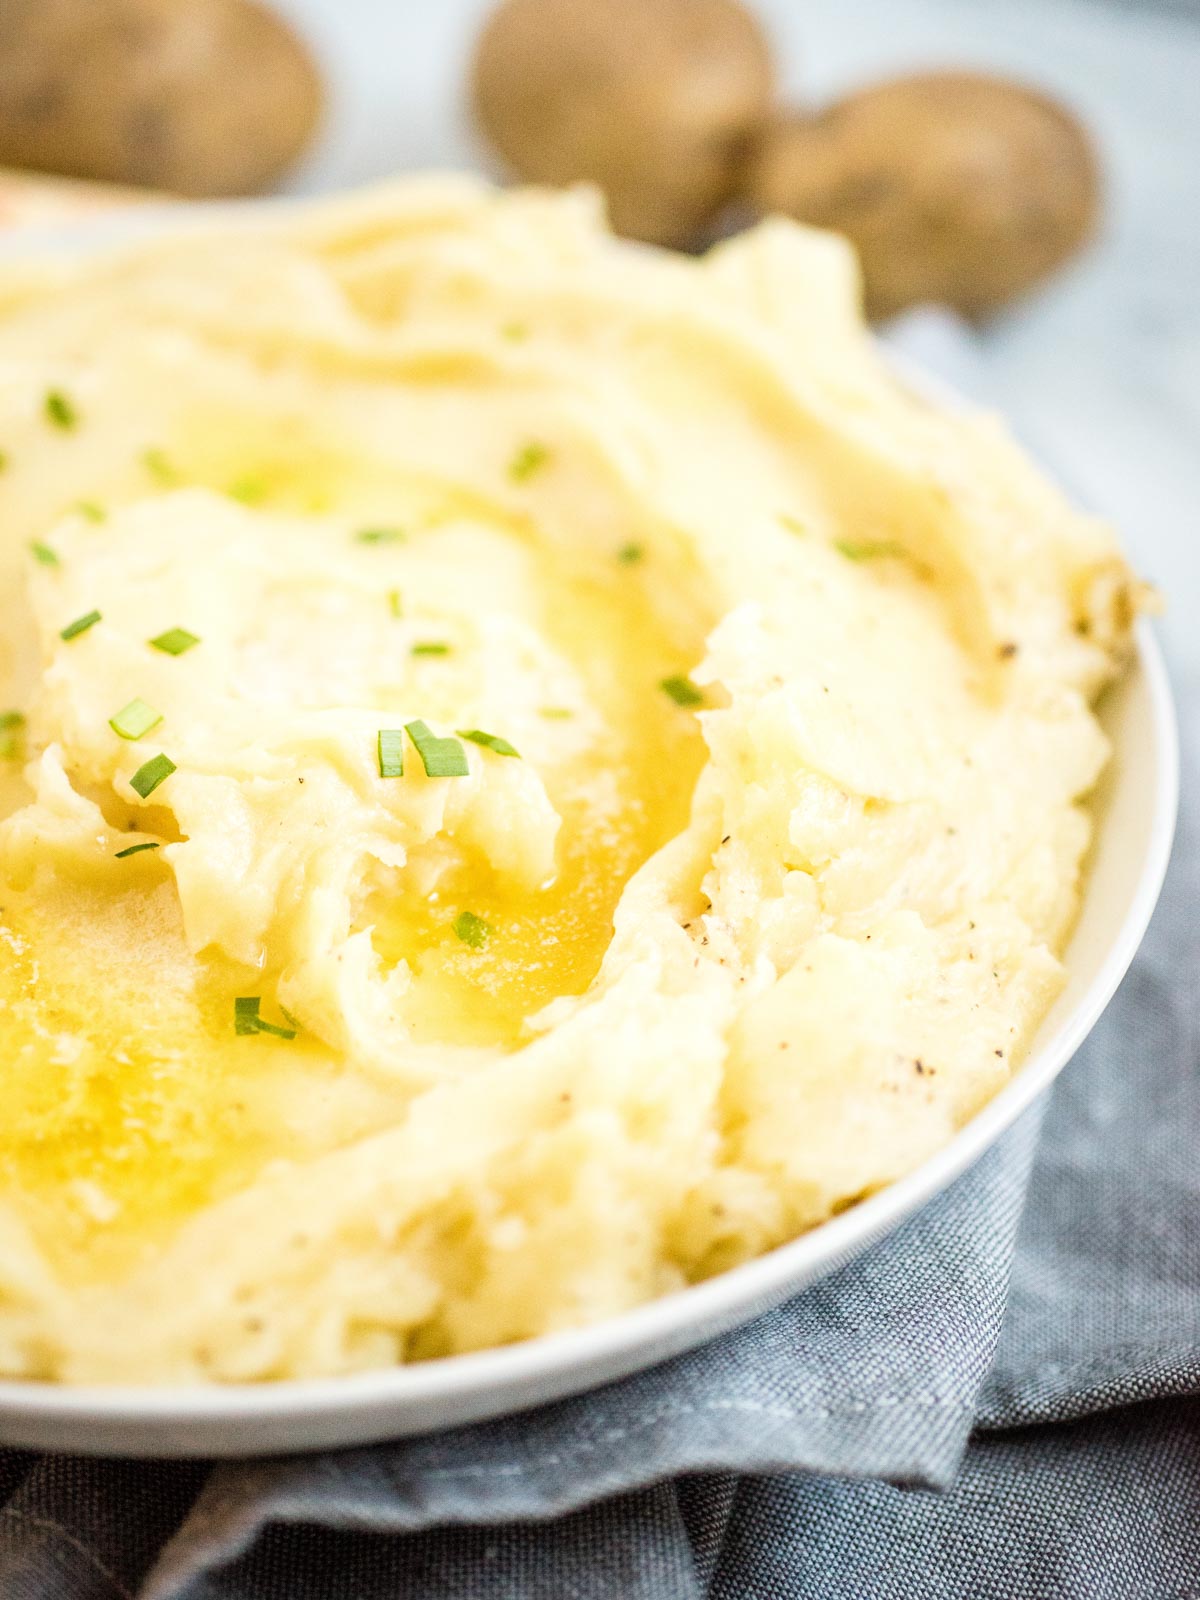 mashed potatoes in white dish topped with melted butter